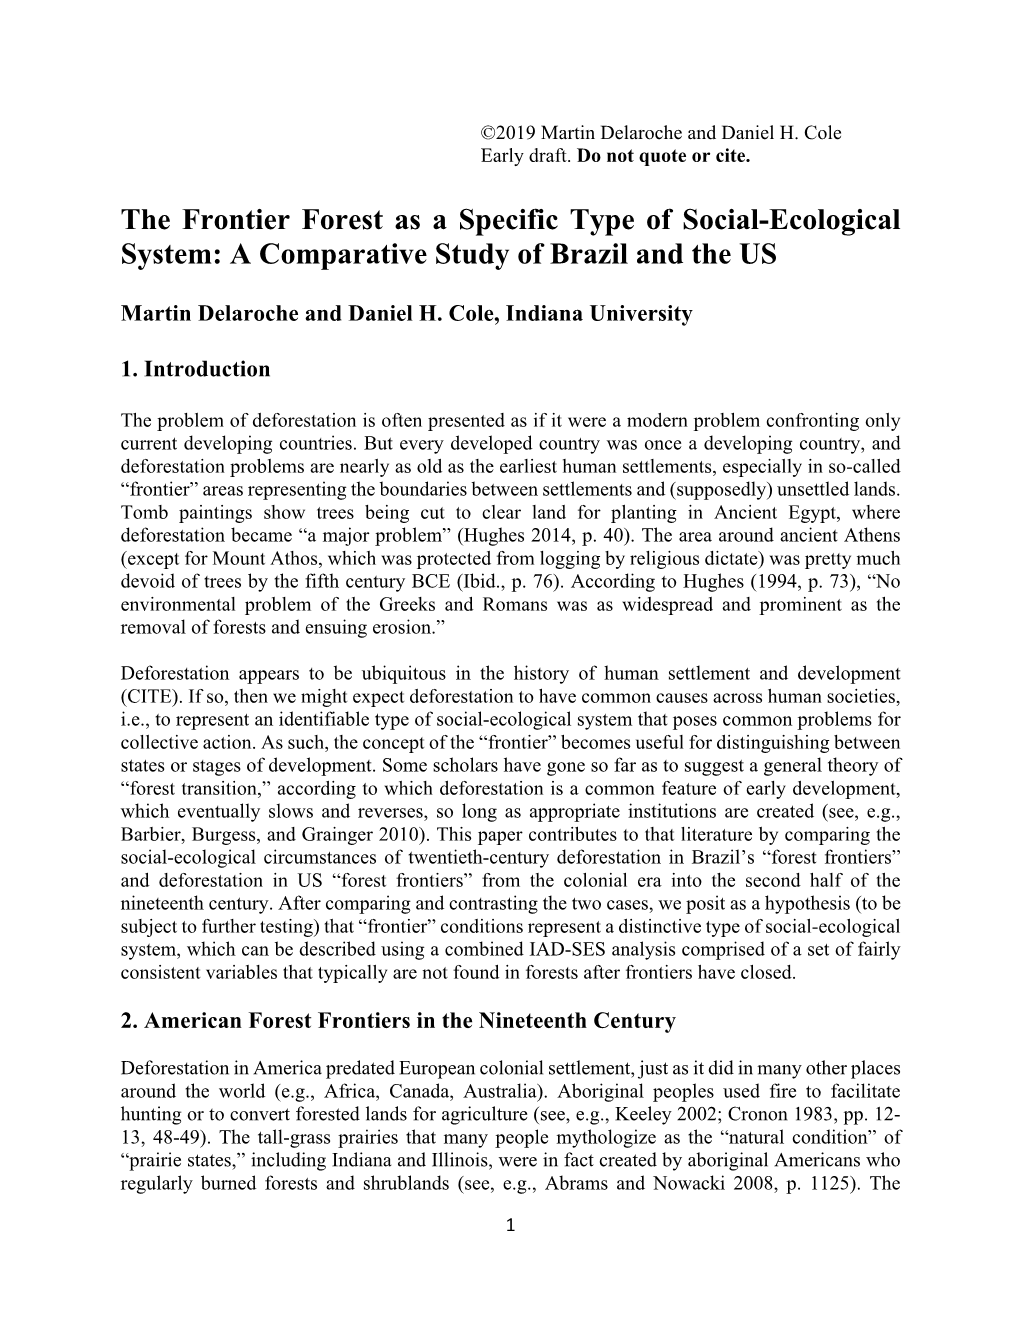 The Frontier Forest As a Specific Type of Social-Ecological System: a Comparative Study of Brazil and the US